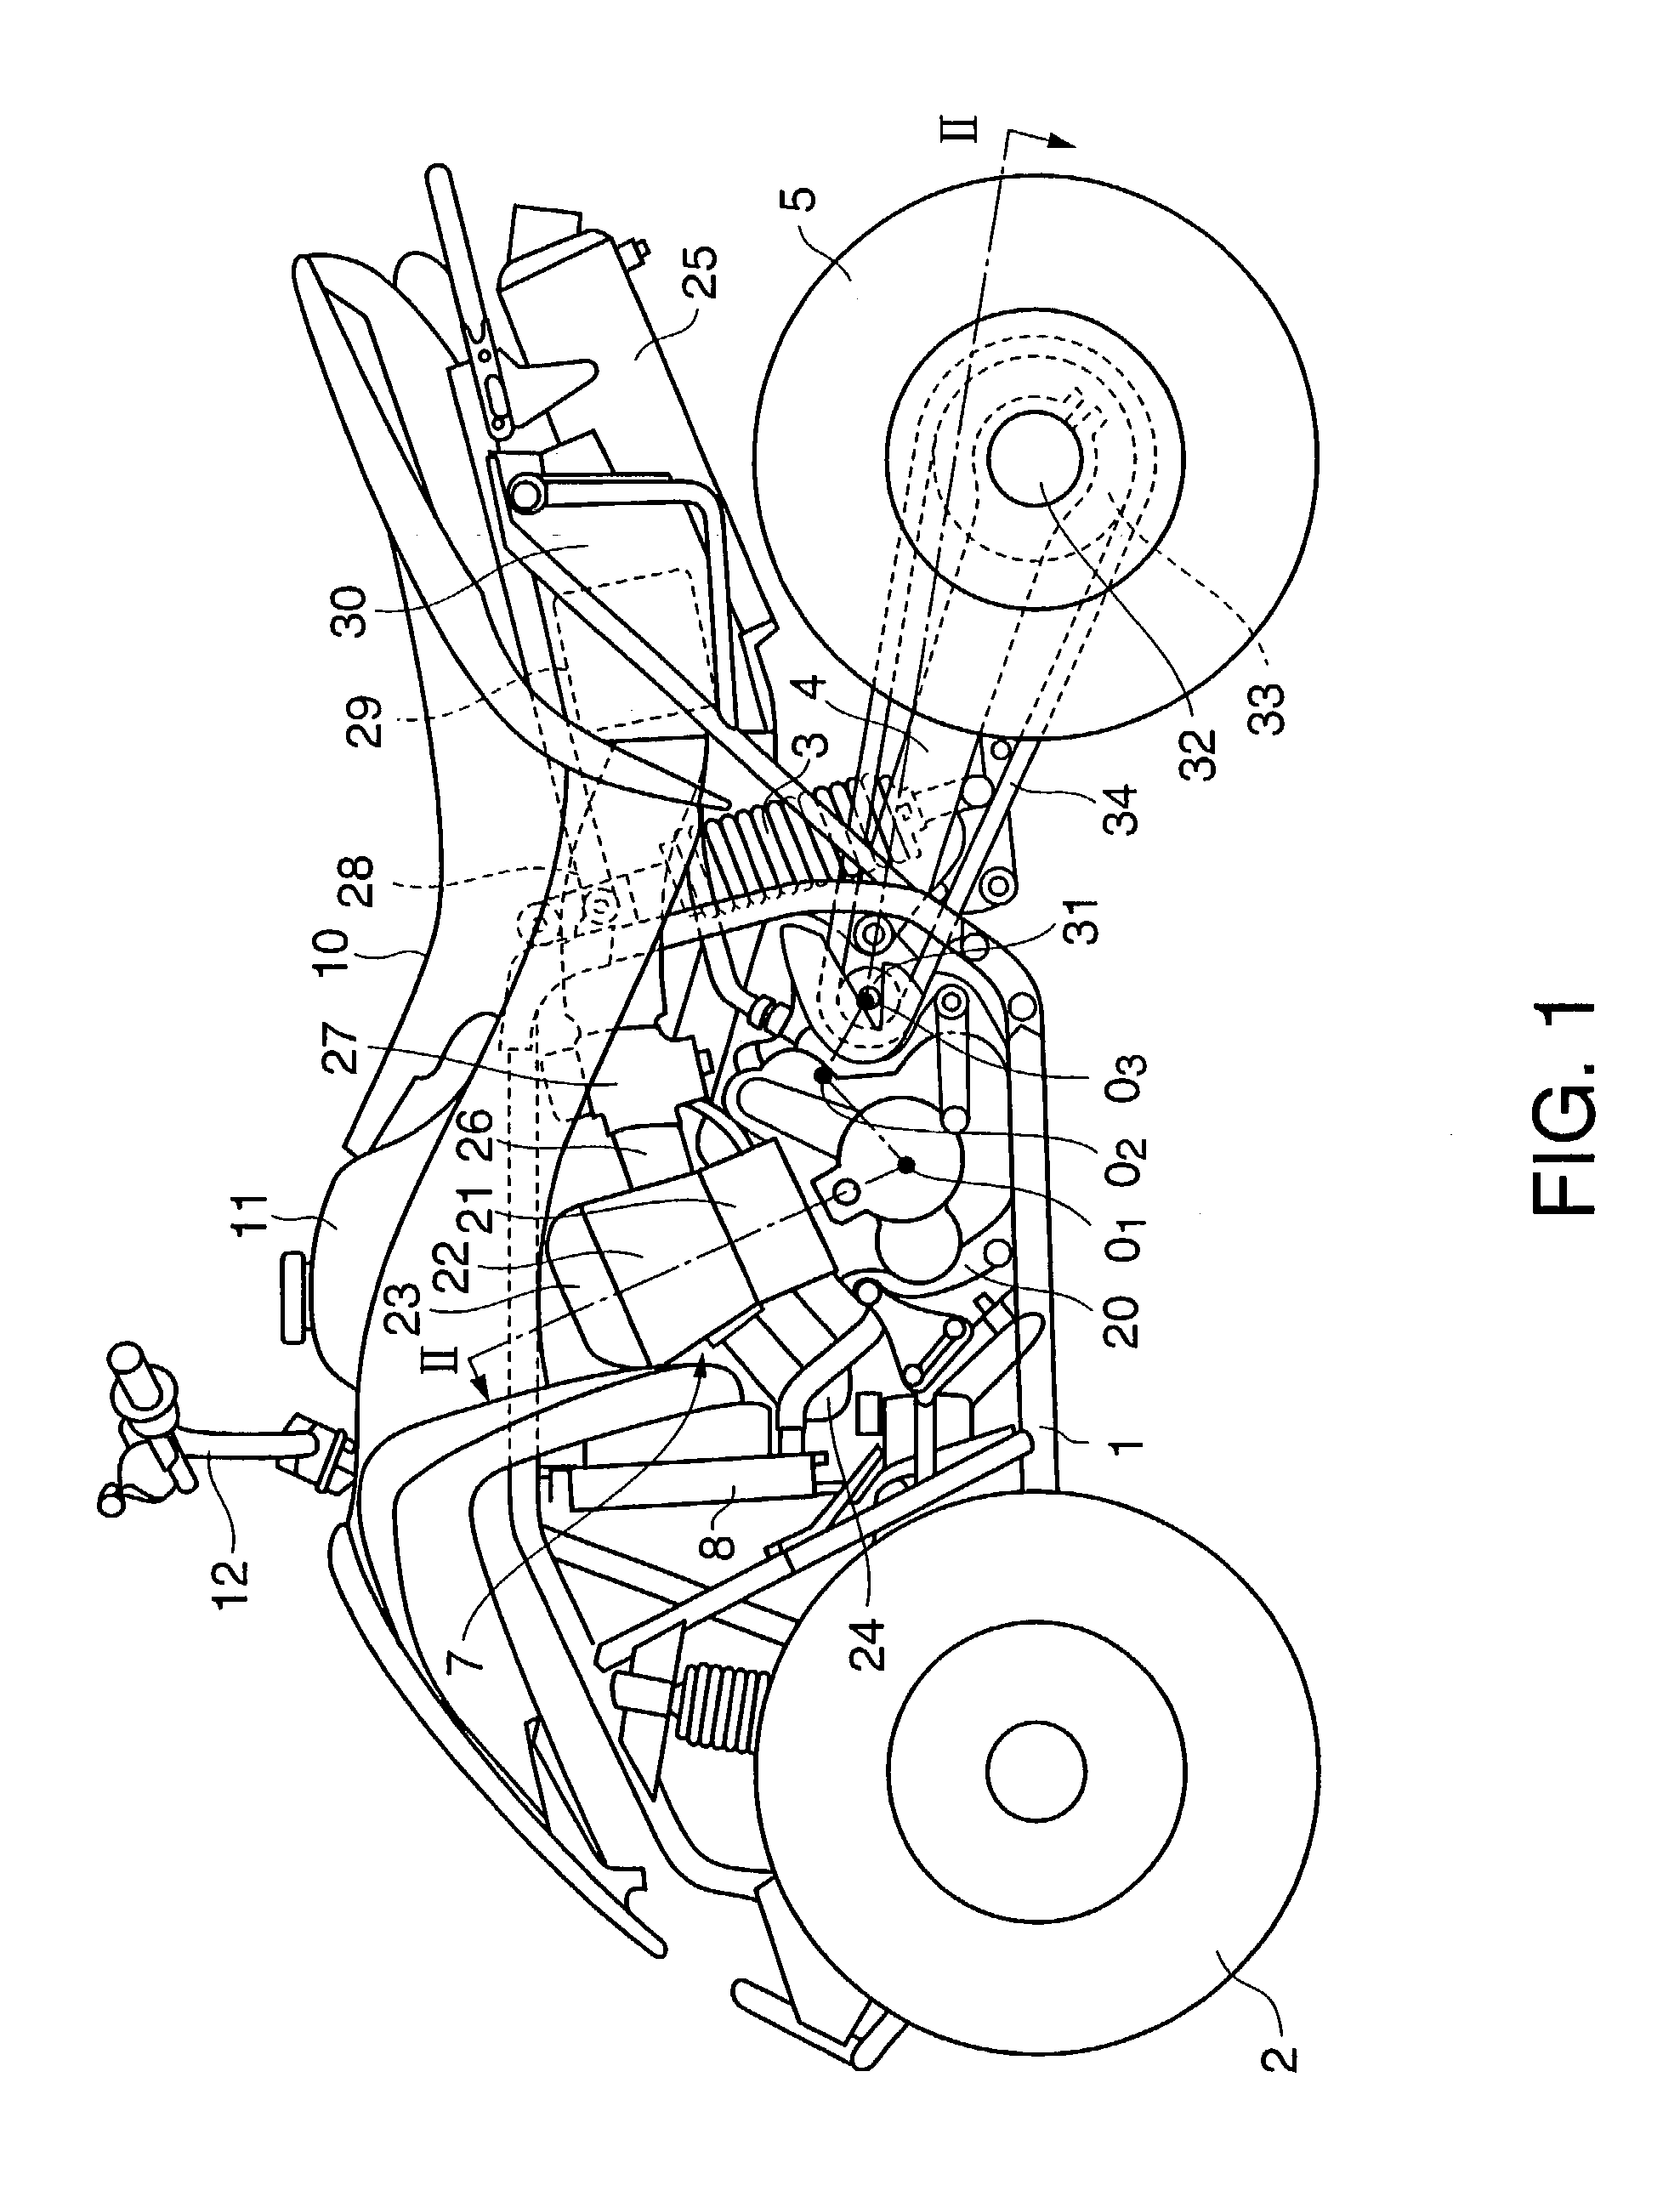 Dry-sump lubrication type four-stroke cycle engine